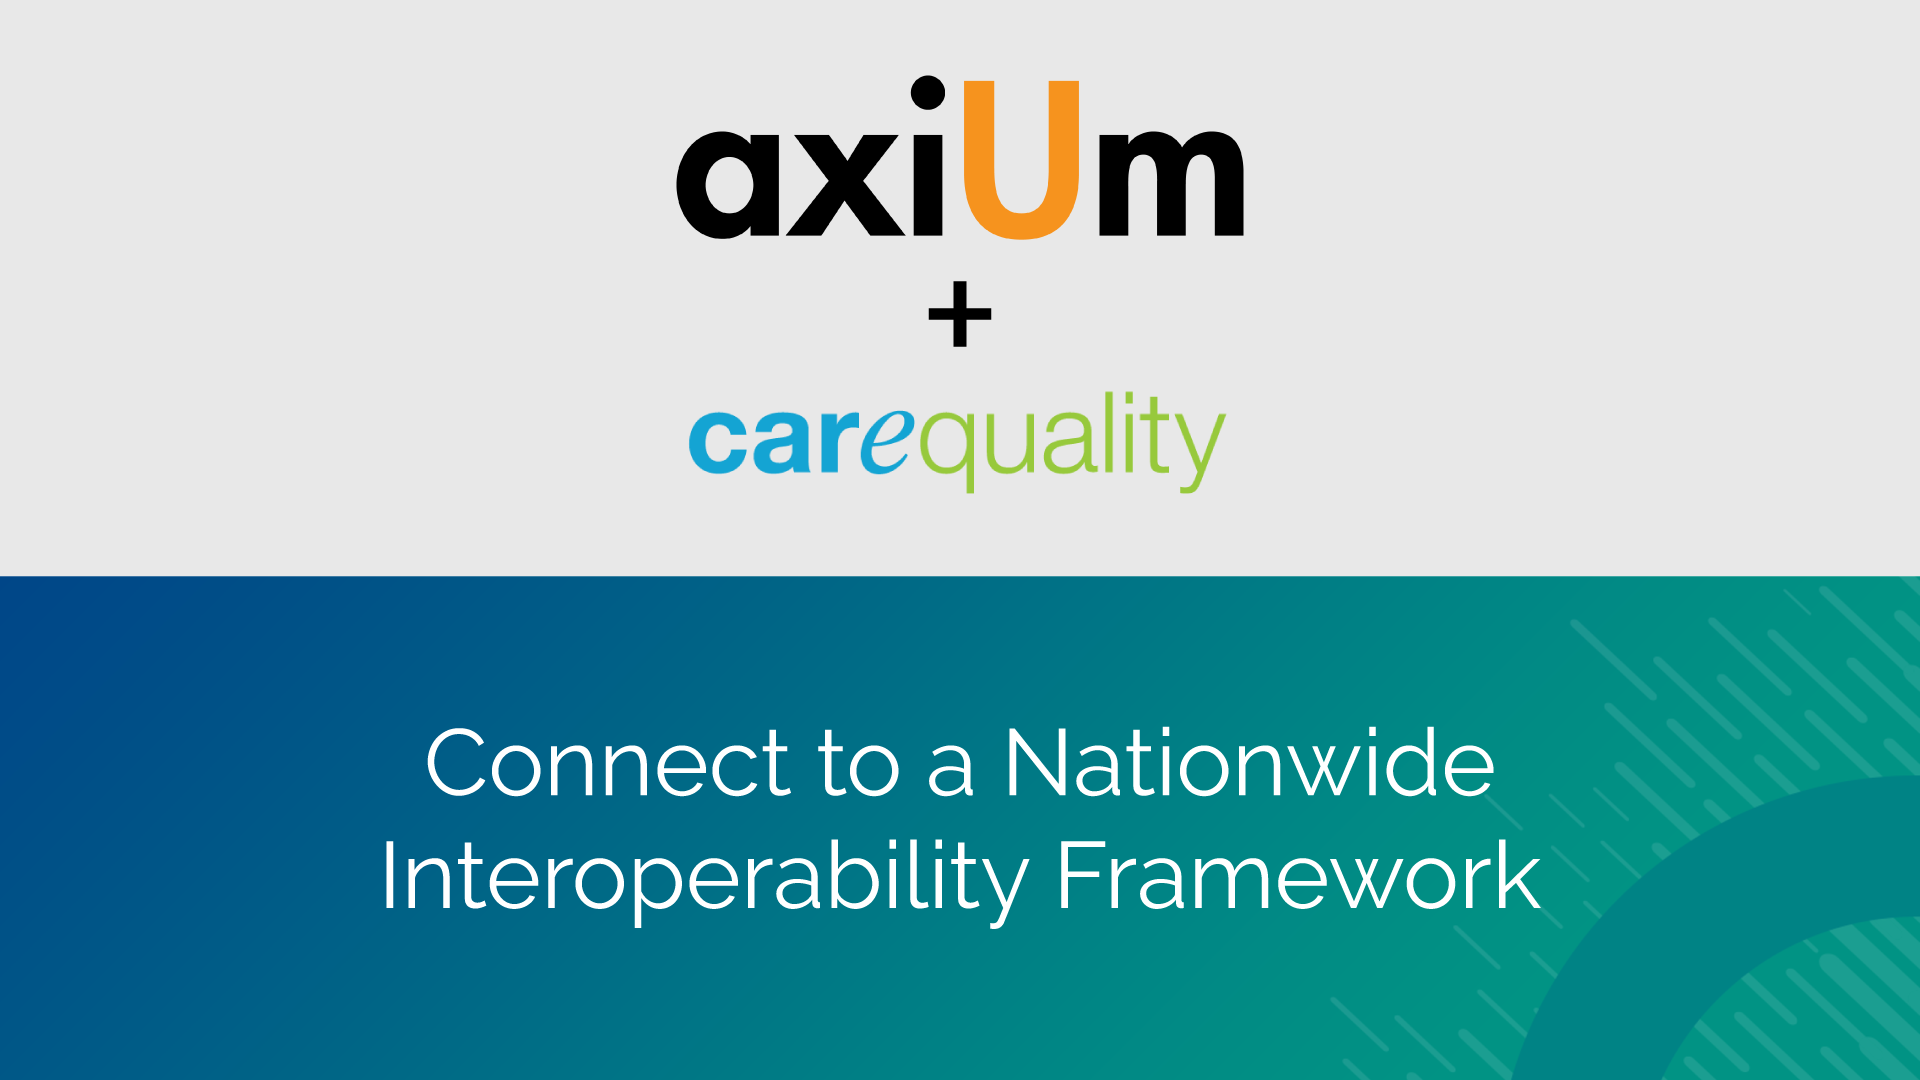 Connect to a Nationwide Interoperability Framework